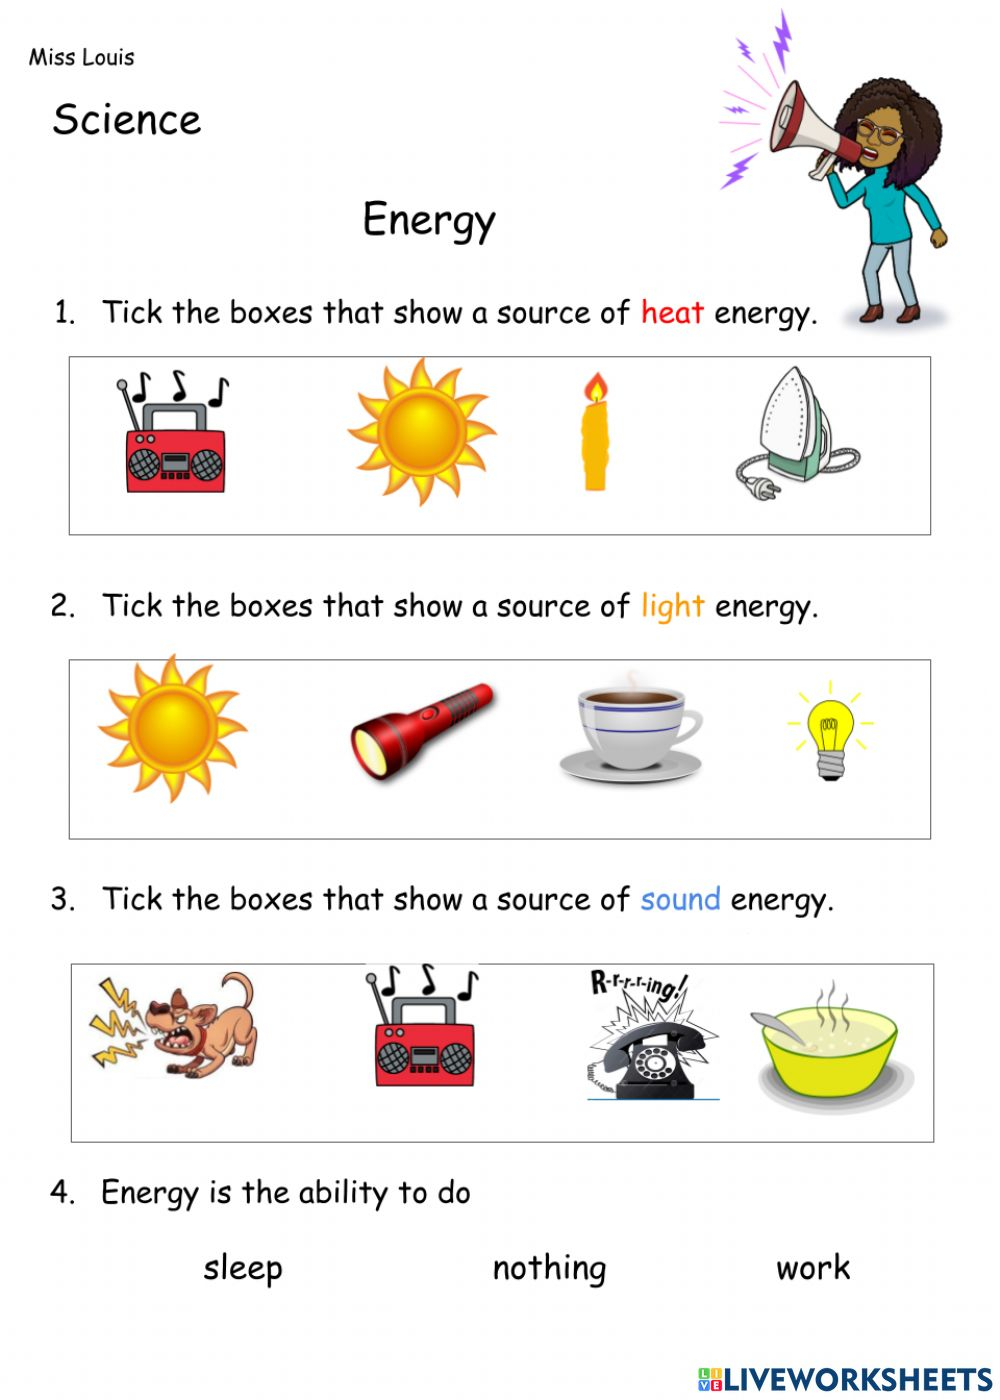 Energy Resources Worksheets K5 Learning Energy Practice Test Science